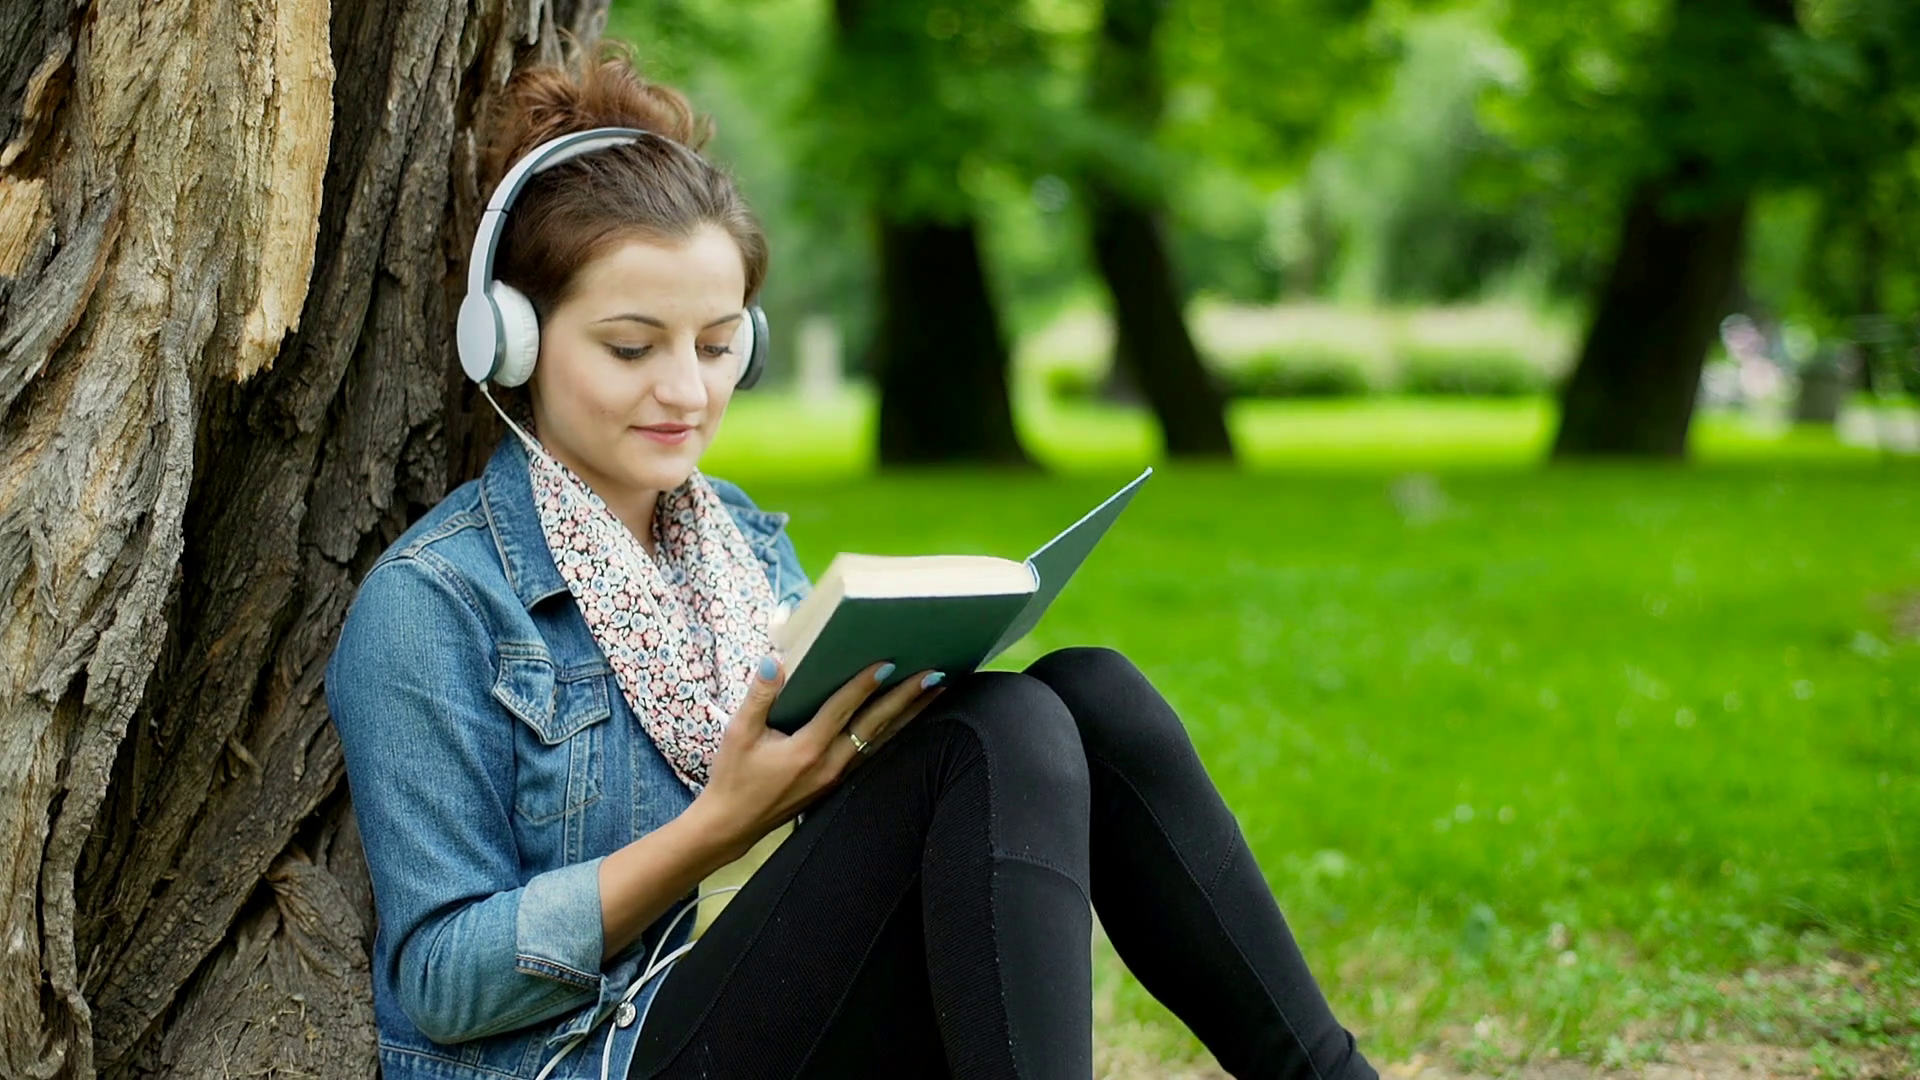 Girl listening music on headphones and reading book in the park ...